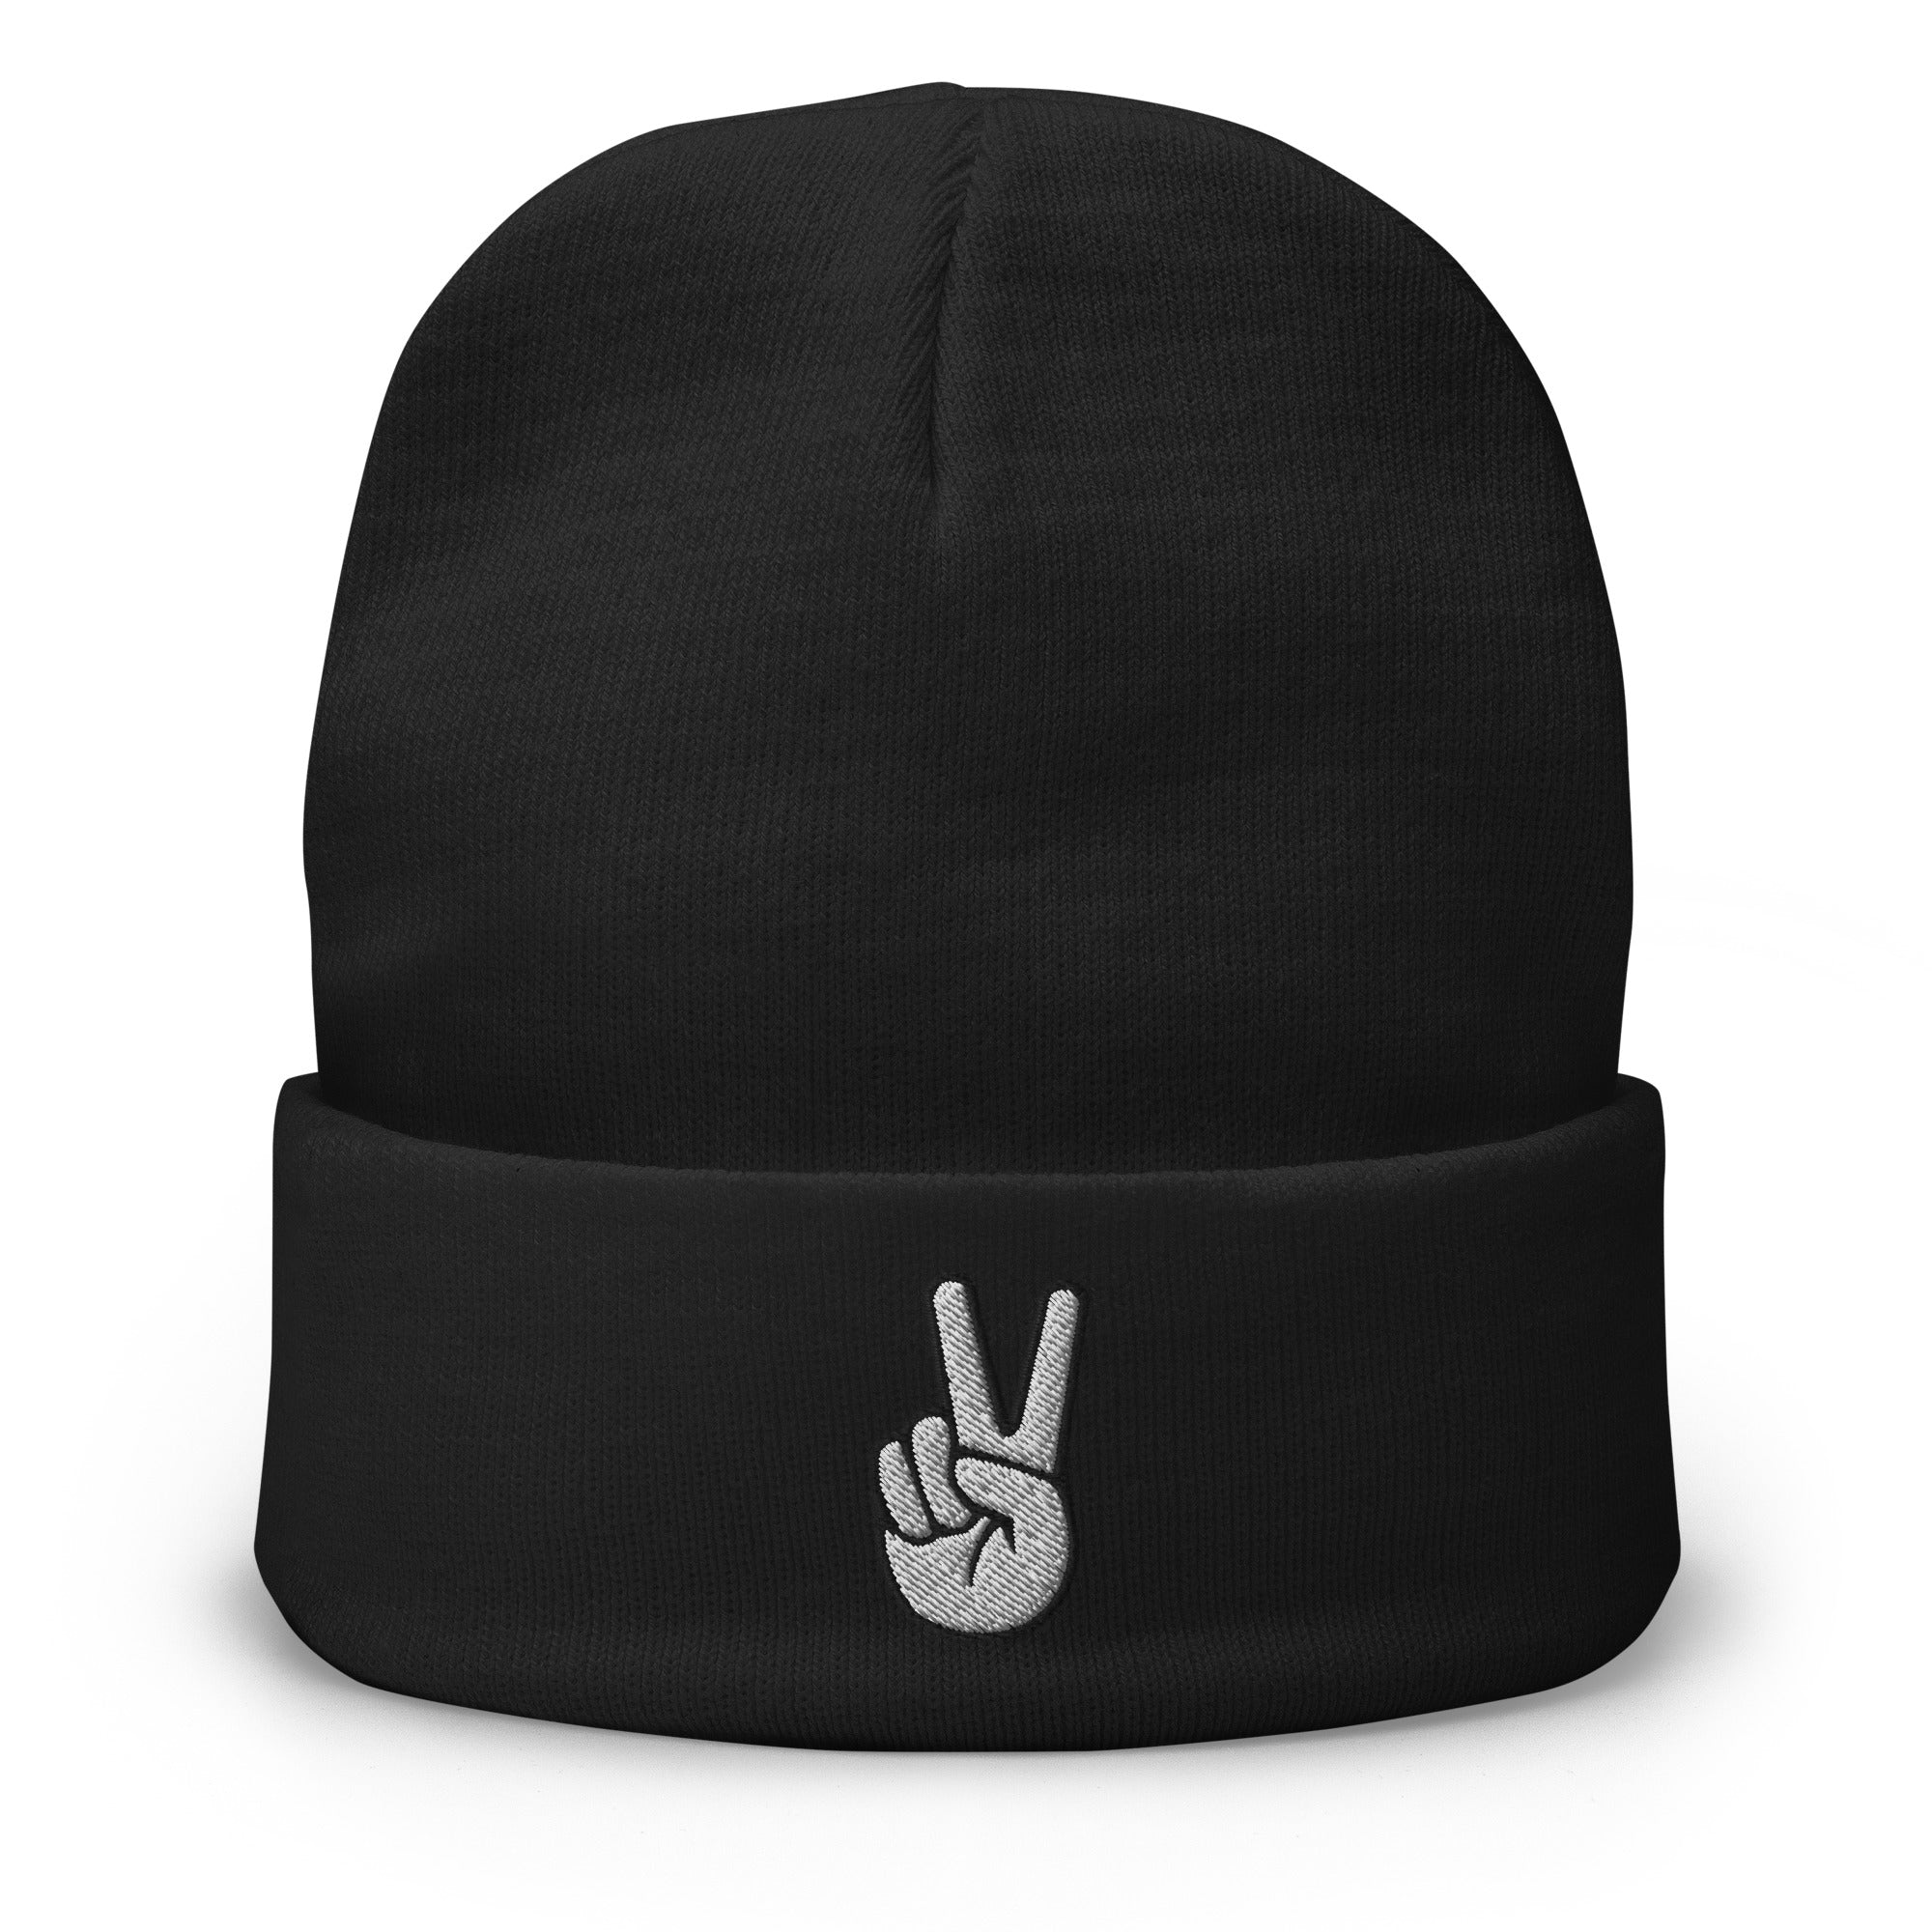 The V Sign for Victory Hand Gesture Embroidered Cuff Beanie